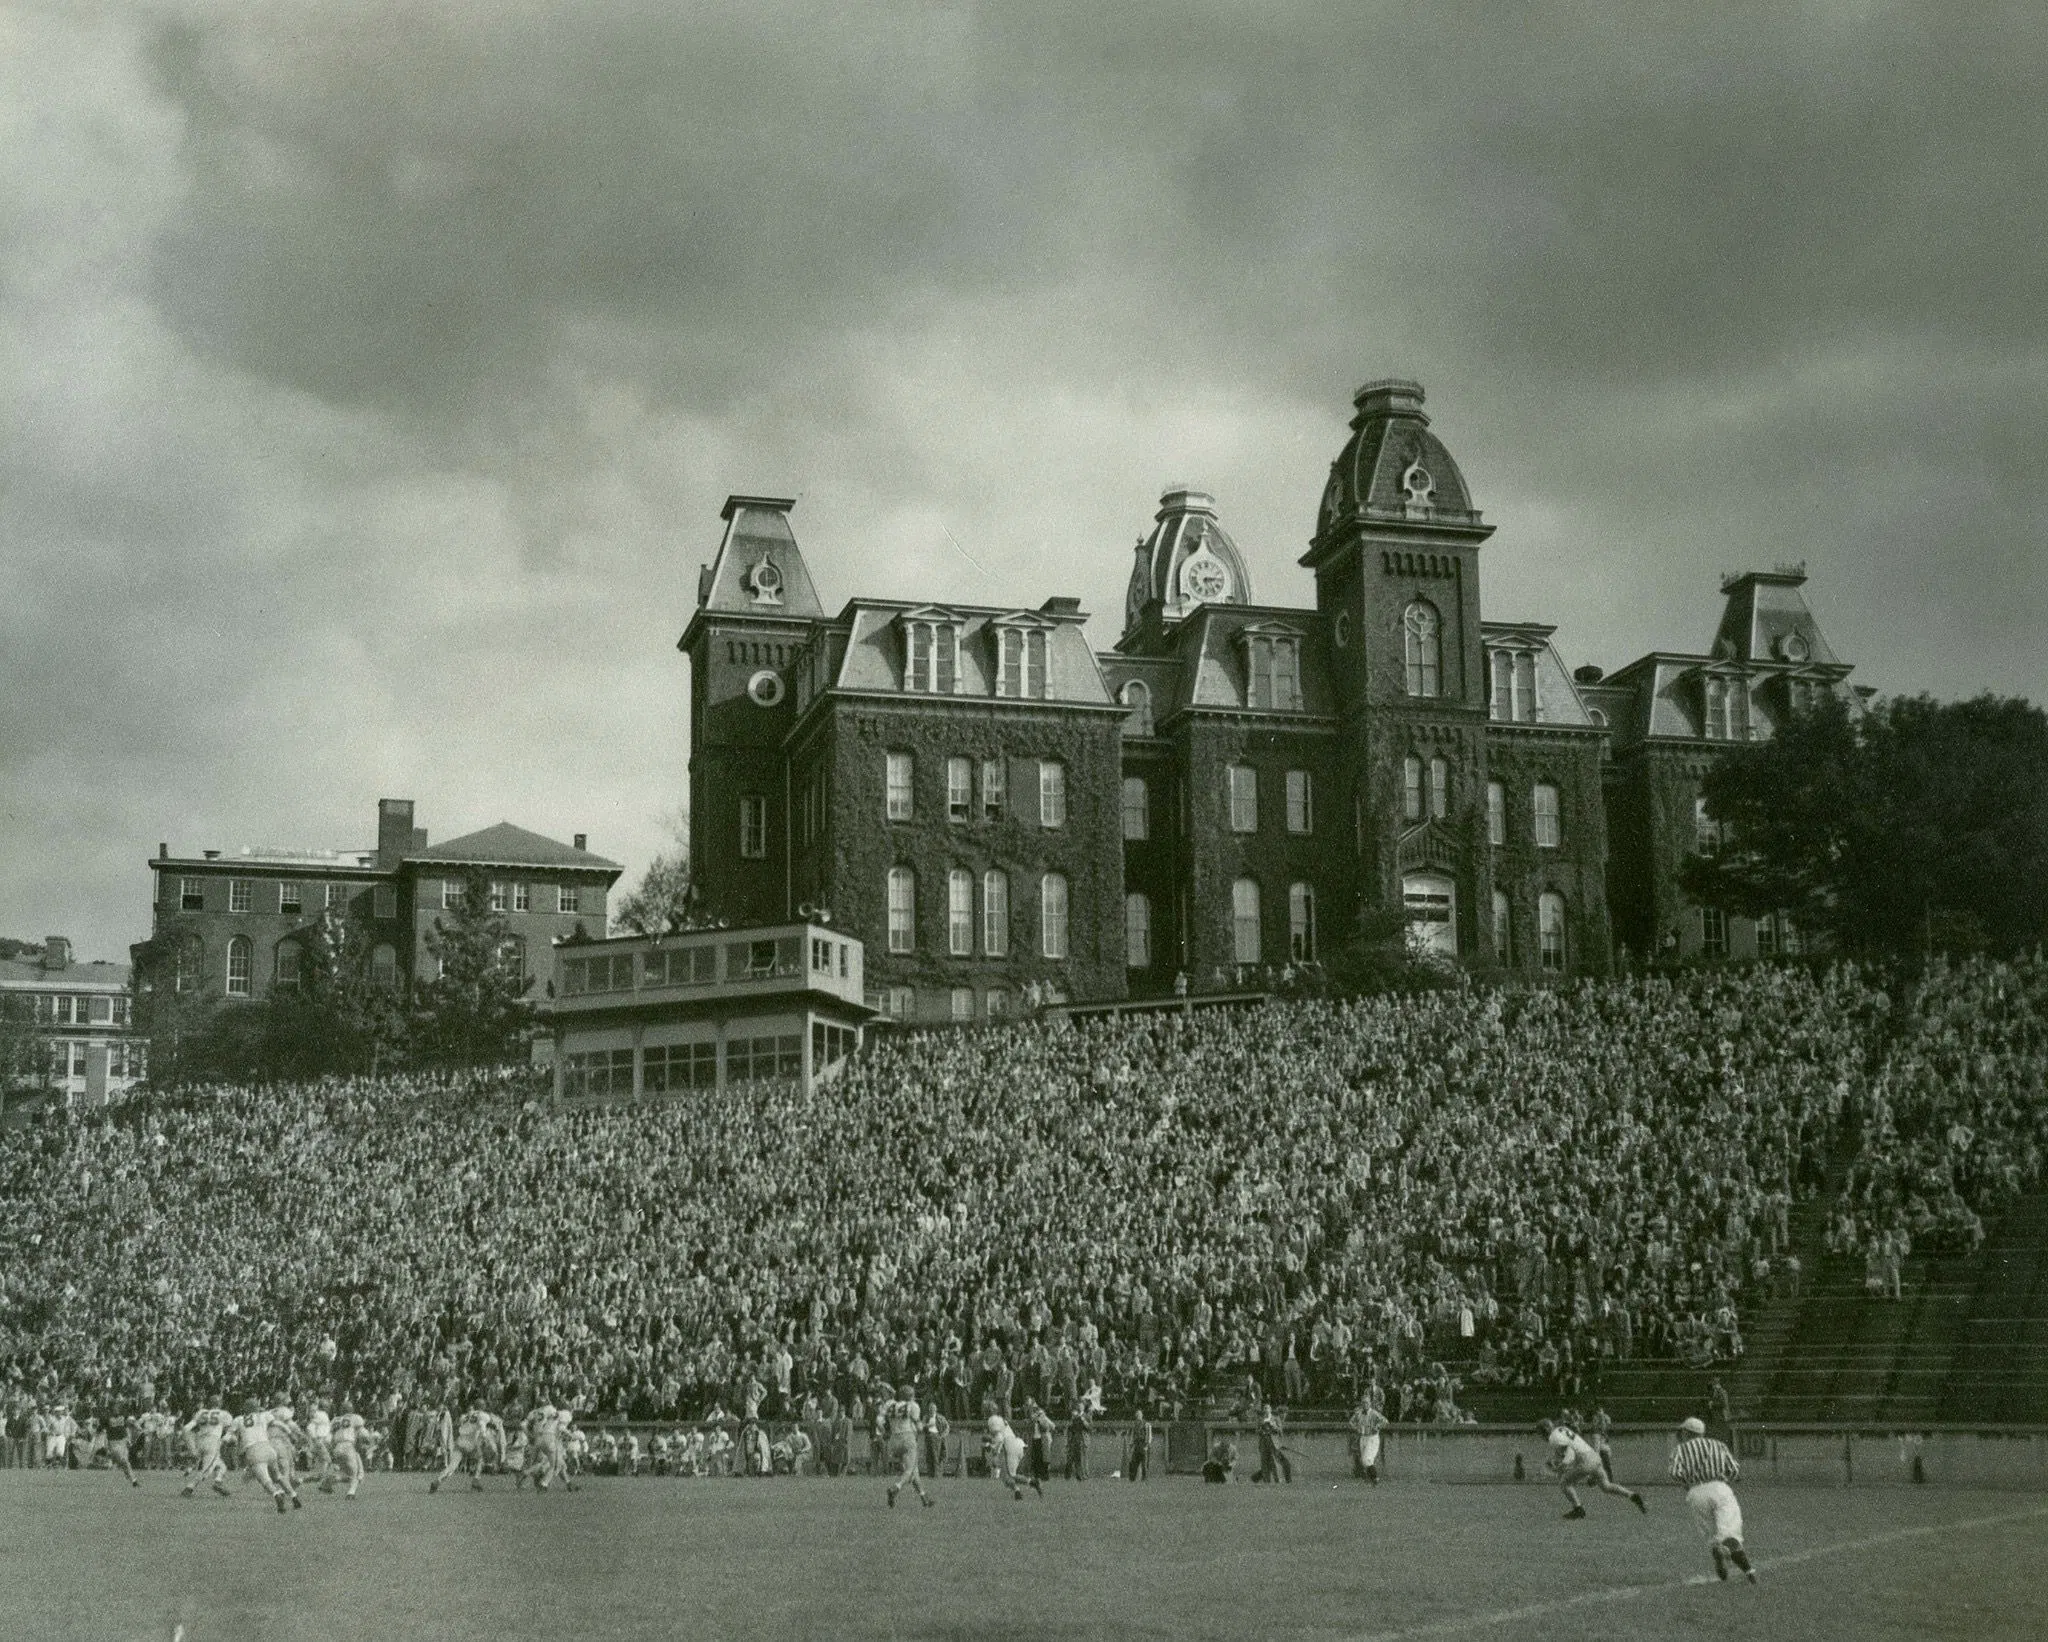 Black and white image captures football game at Old Mountaineer Field with Woodburn Hall, covered in ivy, at the top of the stadium.